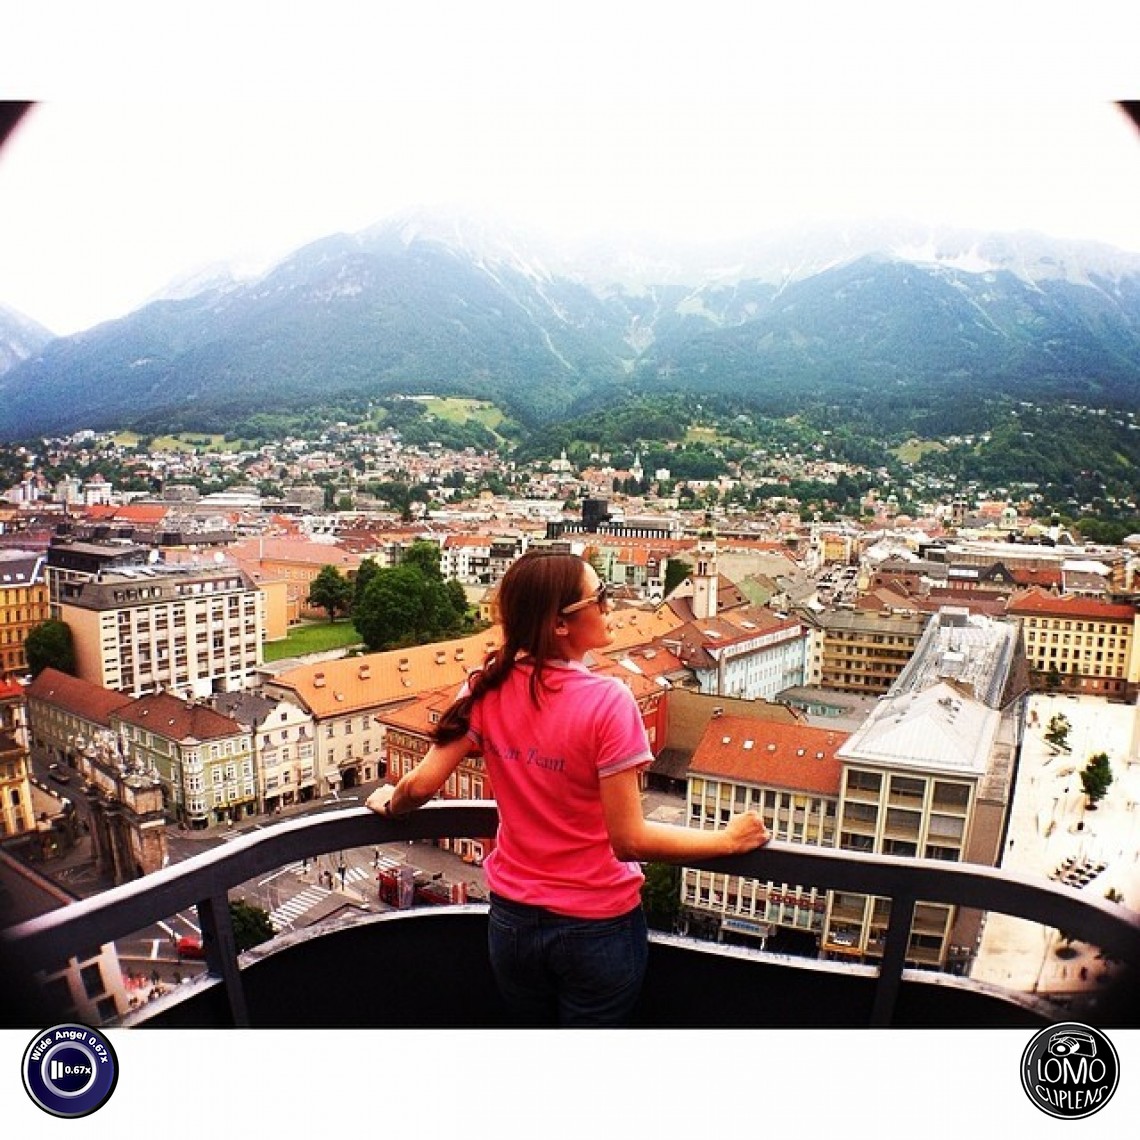 Look what I have seen... Here in #Innsbruck!!! By oaaz  ประเภทเลนส์ Wide Angle 0.67x